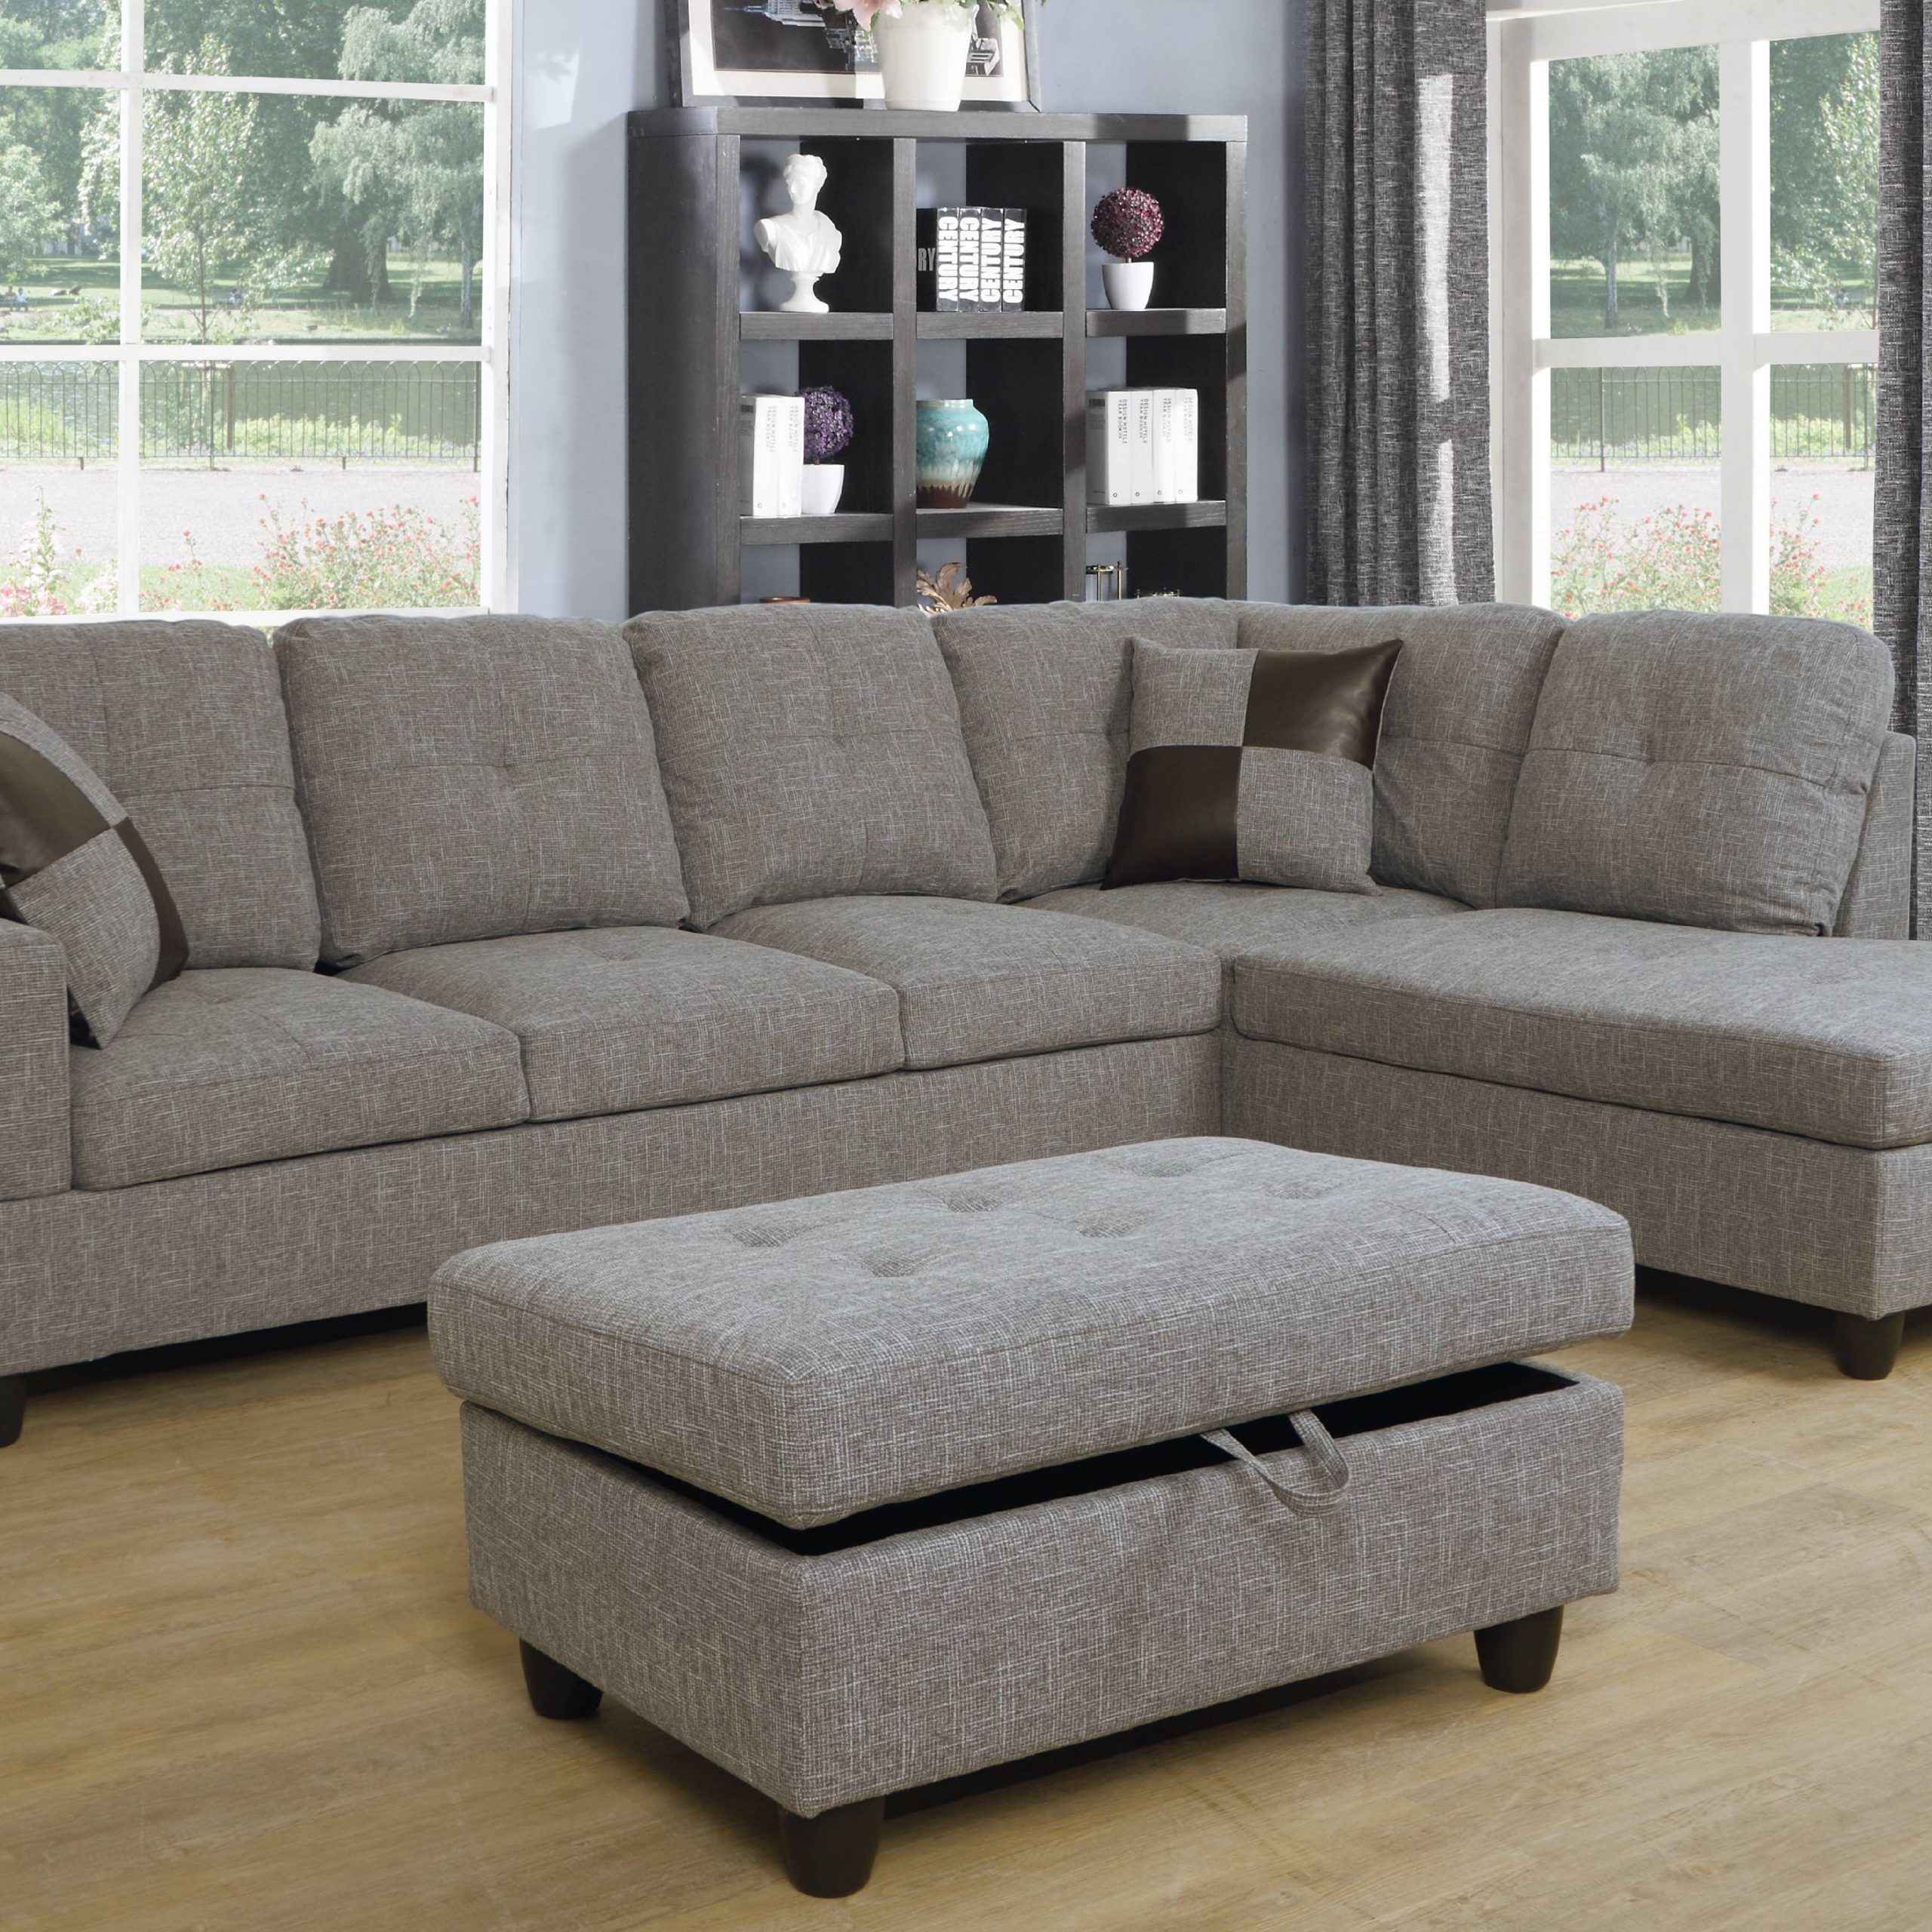 Ponliving Furniture L Shape Sectional Sofa Set With Storage Ottoman Pertaining To Well Known Rustic Brown Sectional Corner Desks (View 2 of 15)